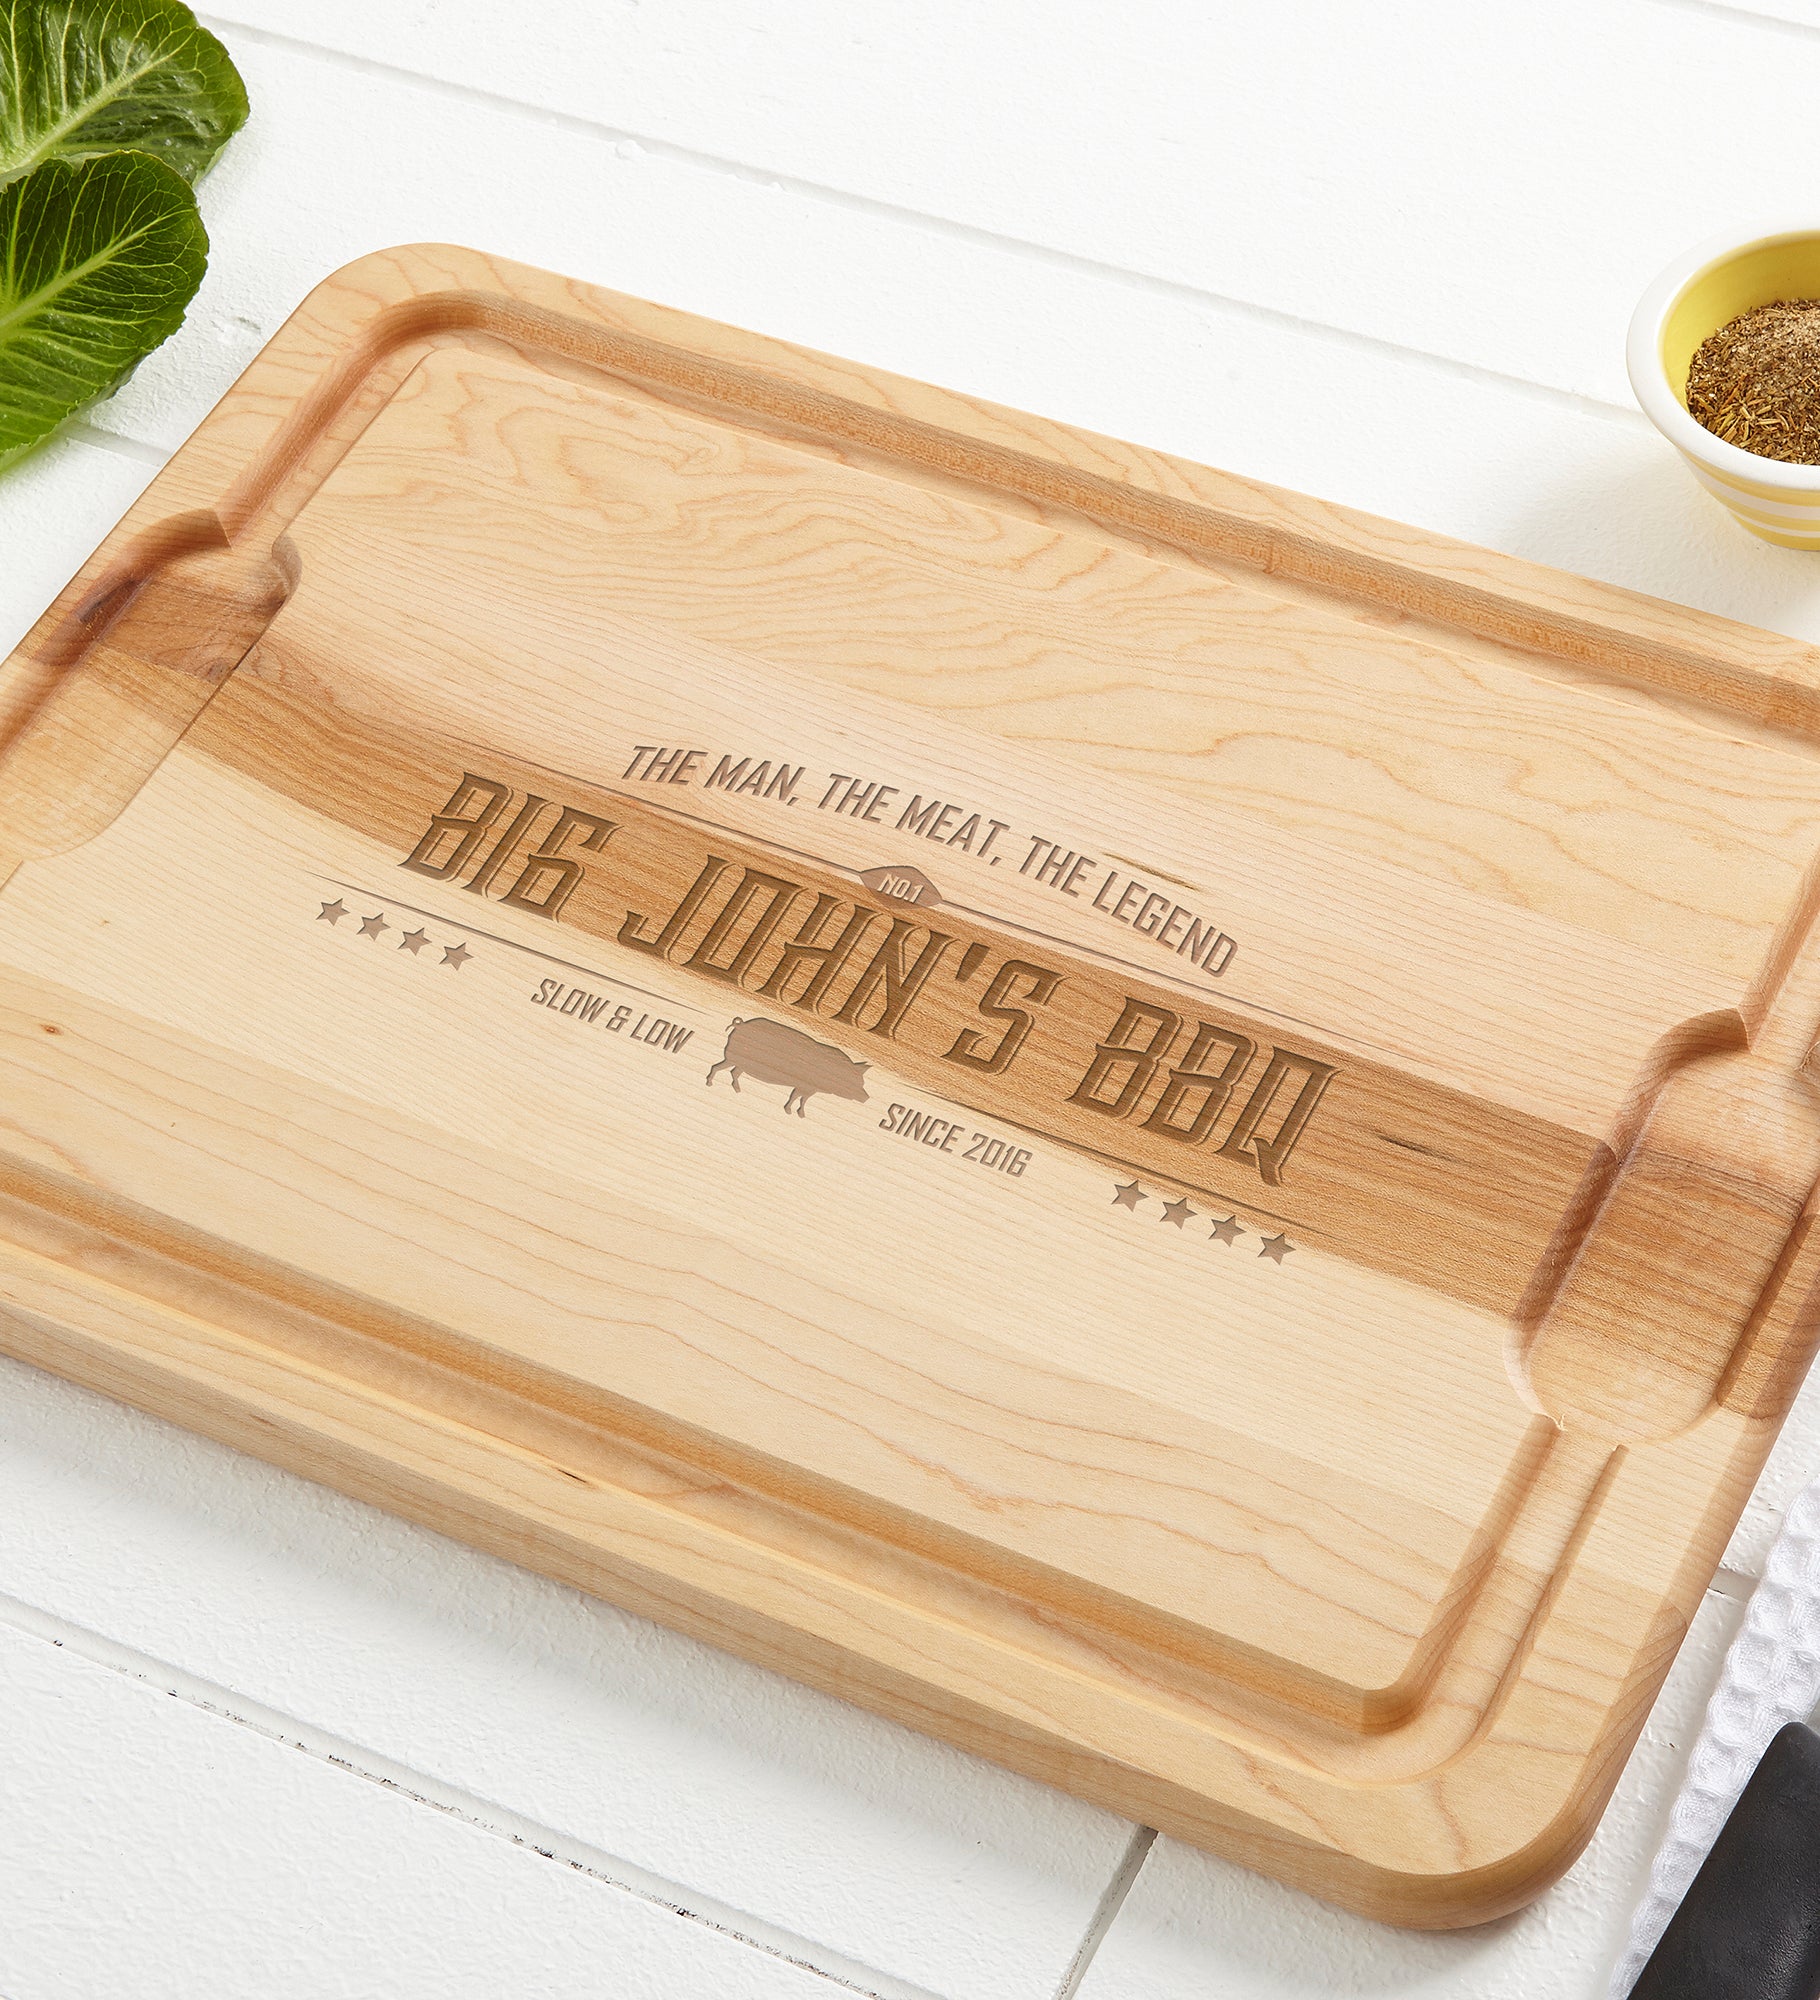 The Man,The Meat,The Legend Personalized Hardwood Cutting Boards